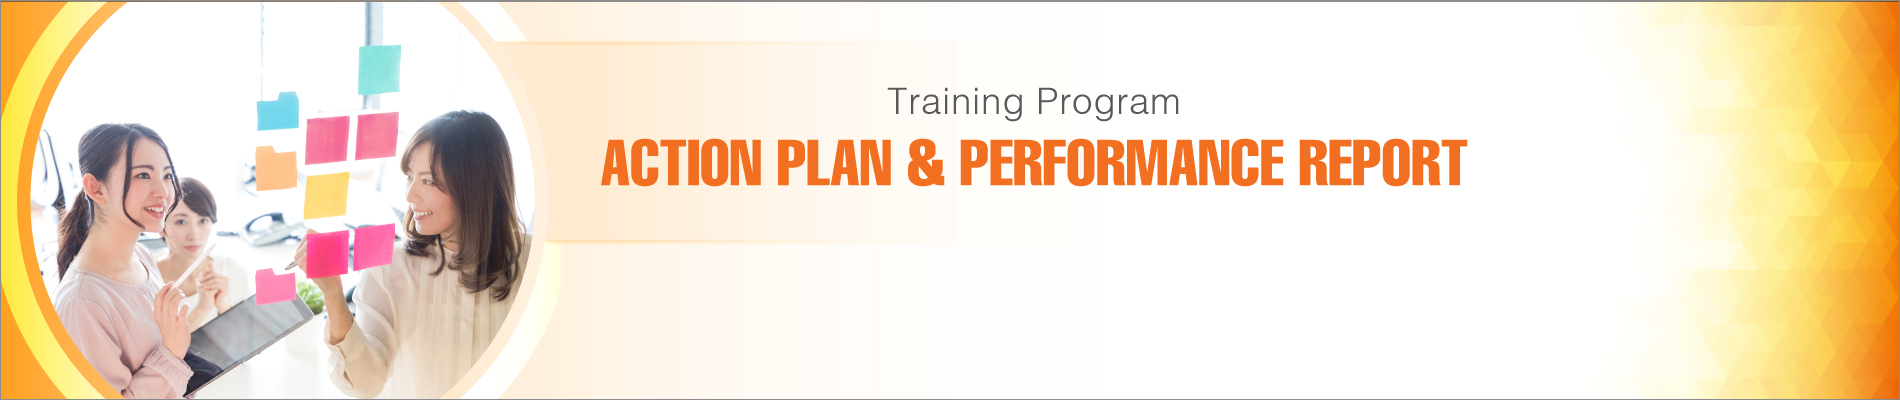 Action Plan & Performance Report